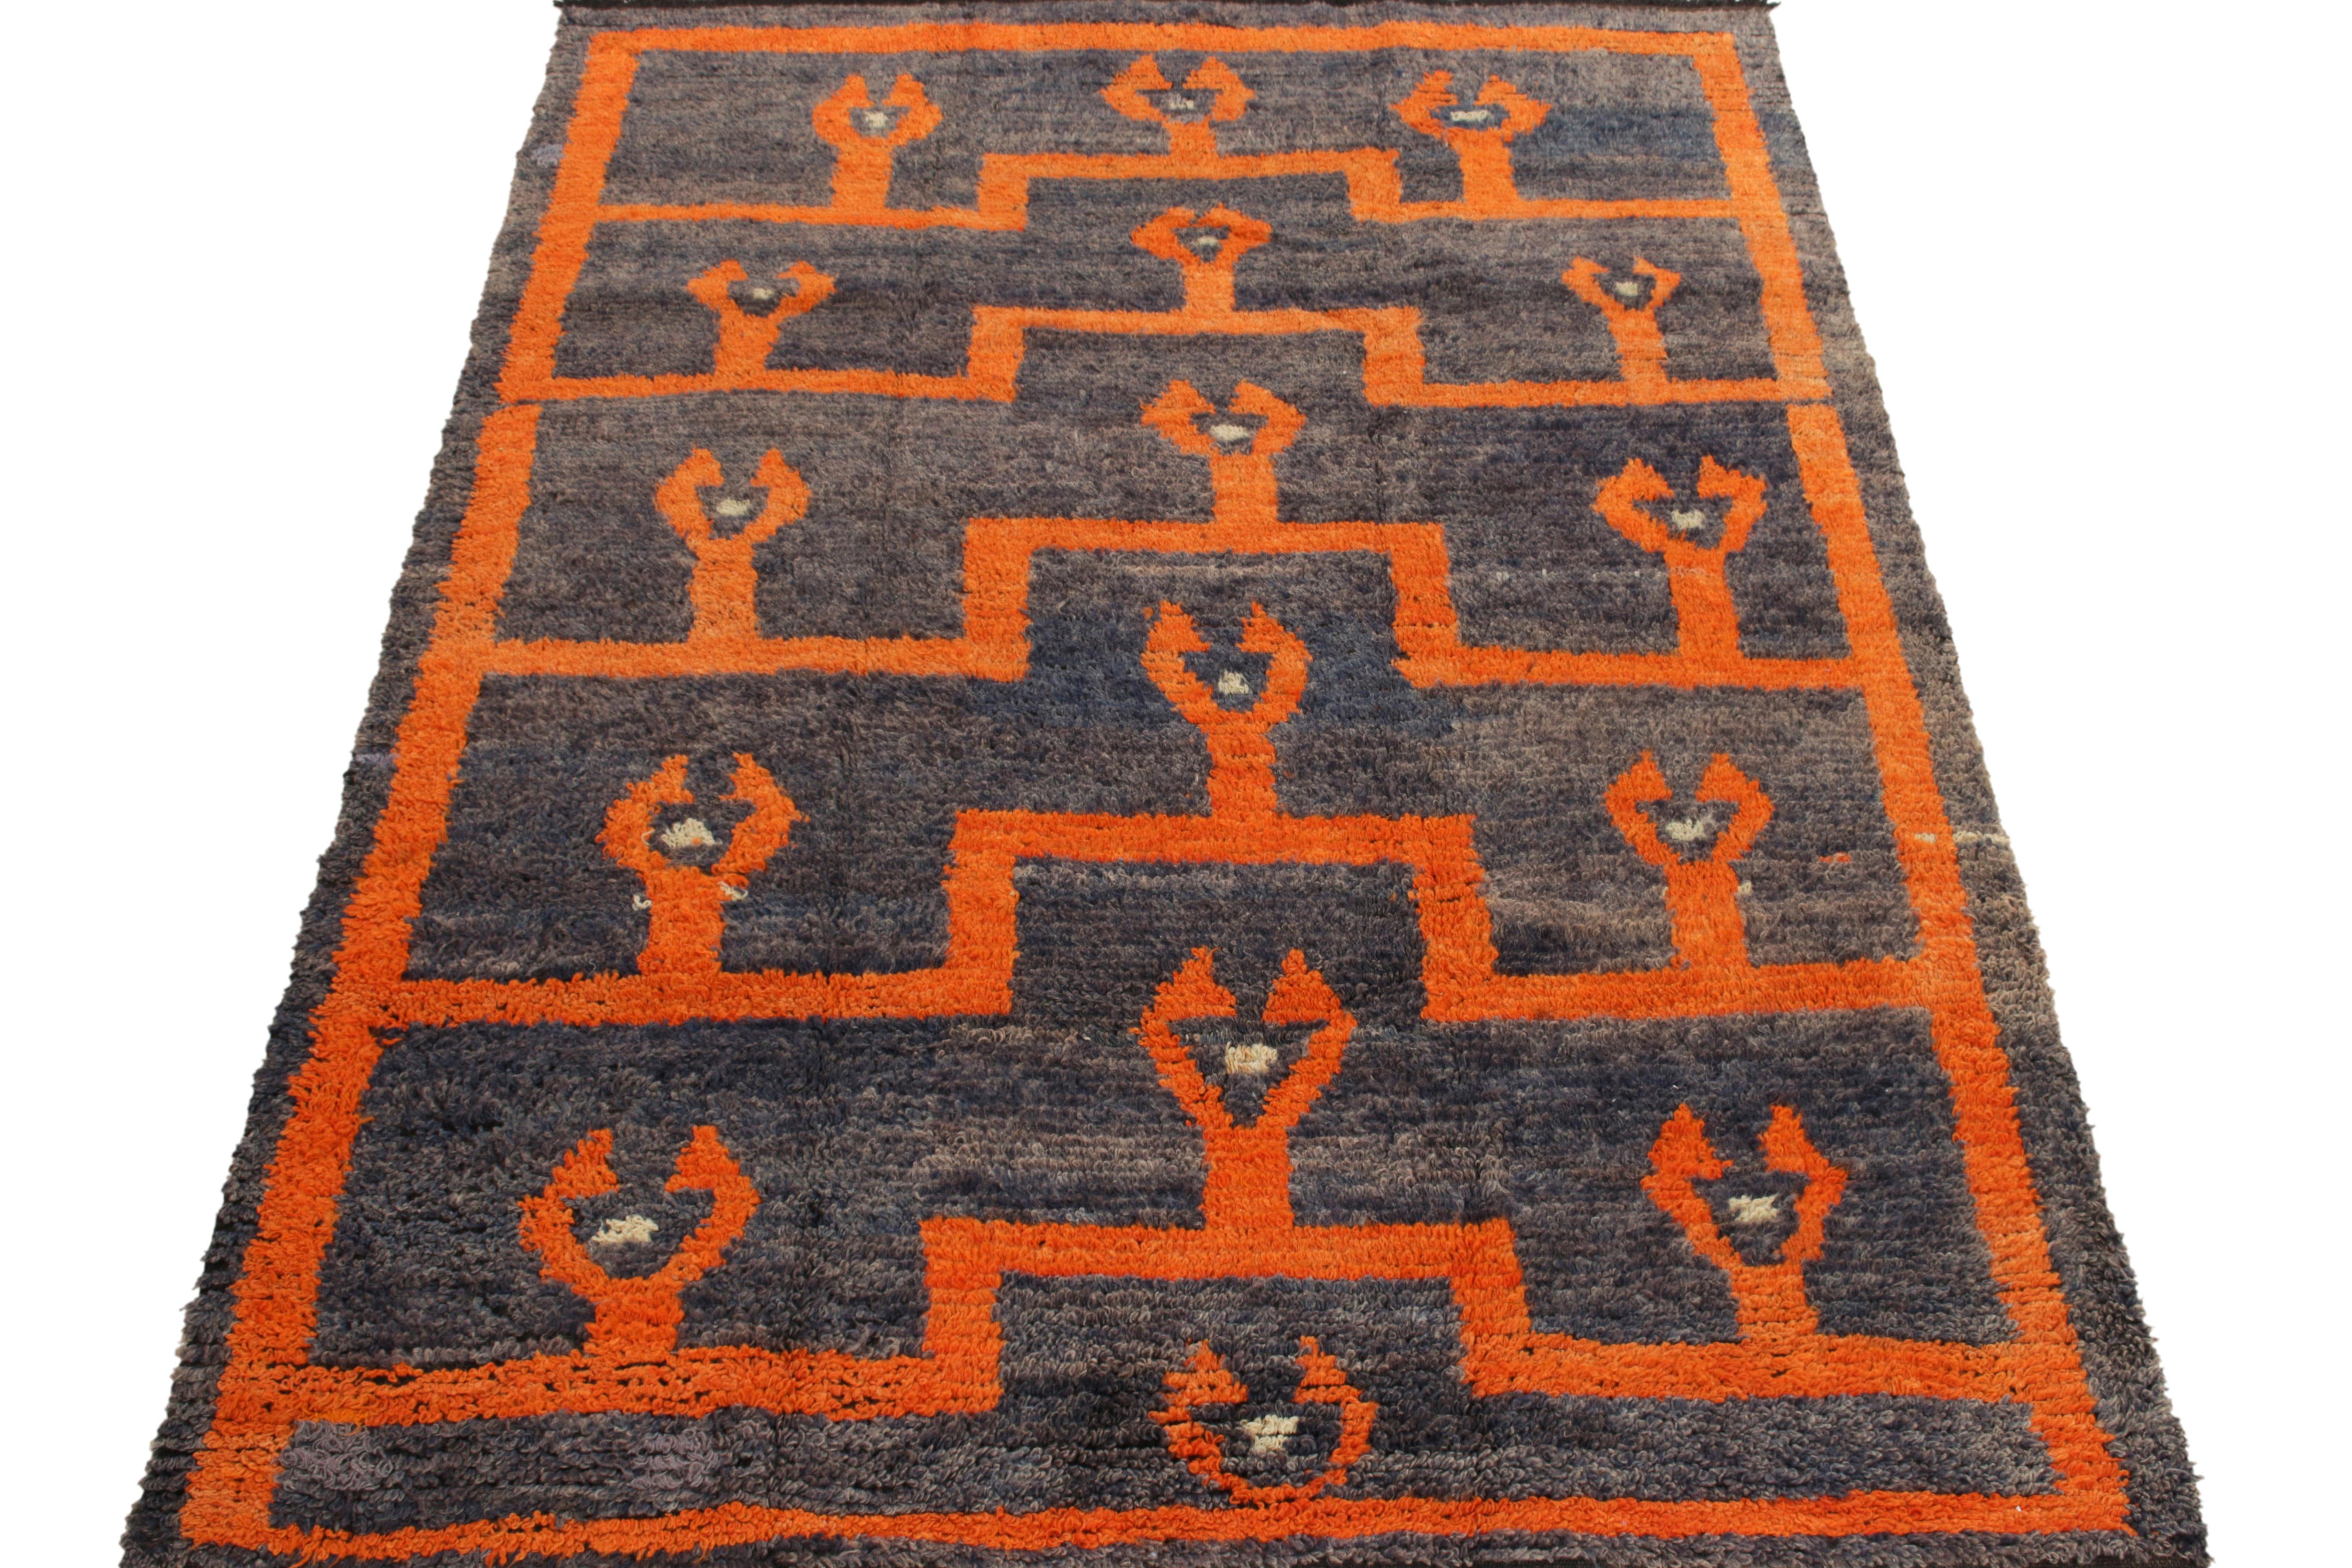 Hand-knotted in wool from Turkey circa 1950-1960, a vintage 5x7 Tulu rug from our Antique & Vintage collection celebrating the mid century approach to this style. Enjoying a symmetric geometric pattern in gray-blue, white and bright orange for a